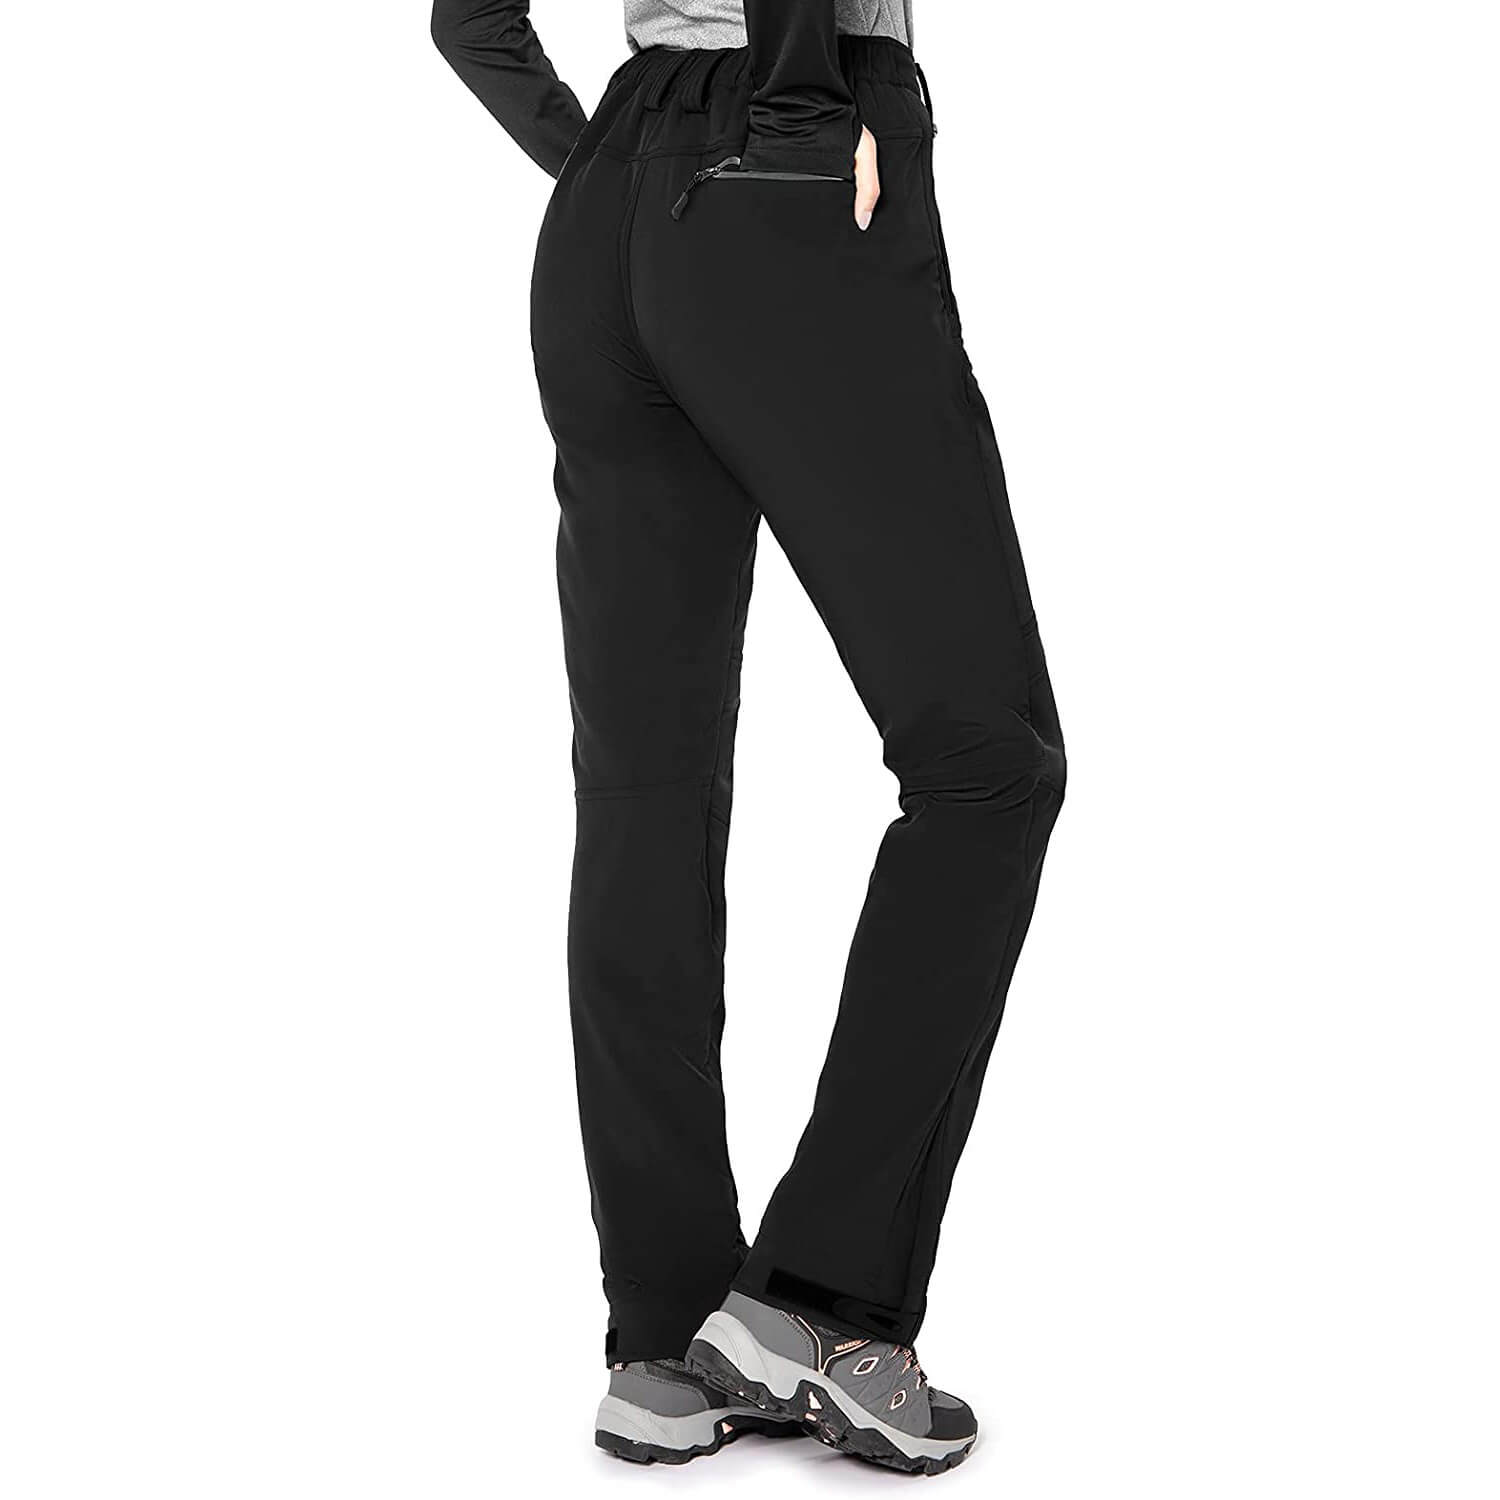 Apotemis Women's Waterproof Snow Ski Pants with Fleece Lining for Hiking &  Insulation